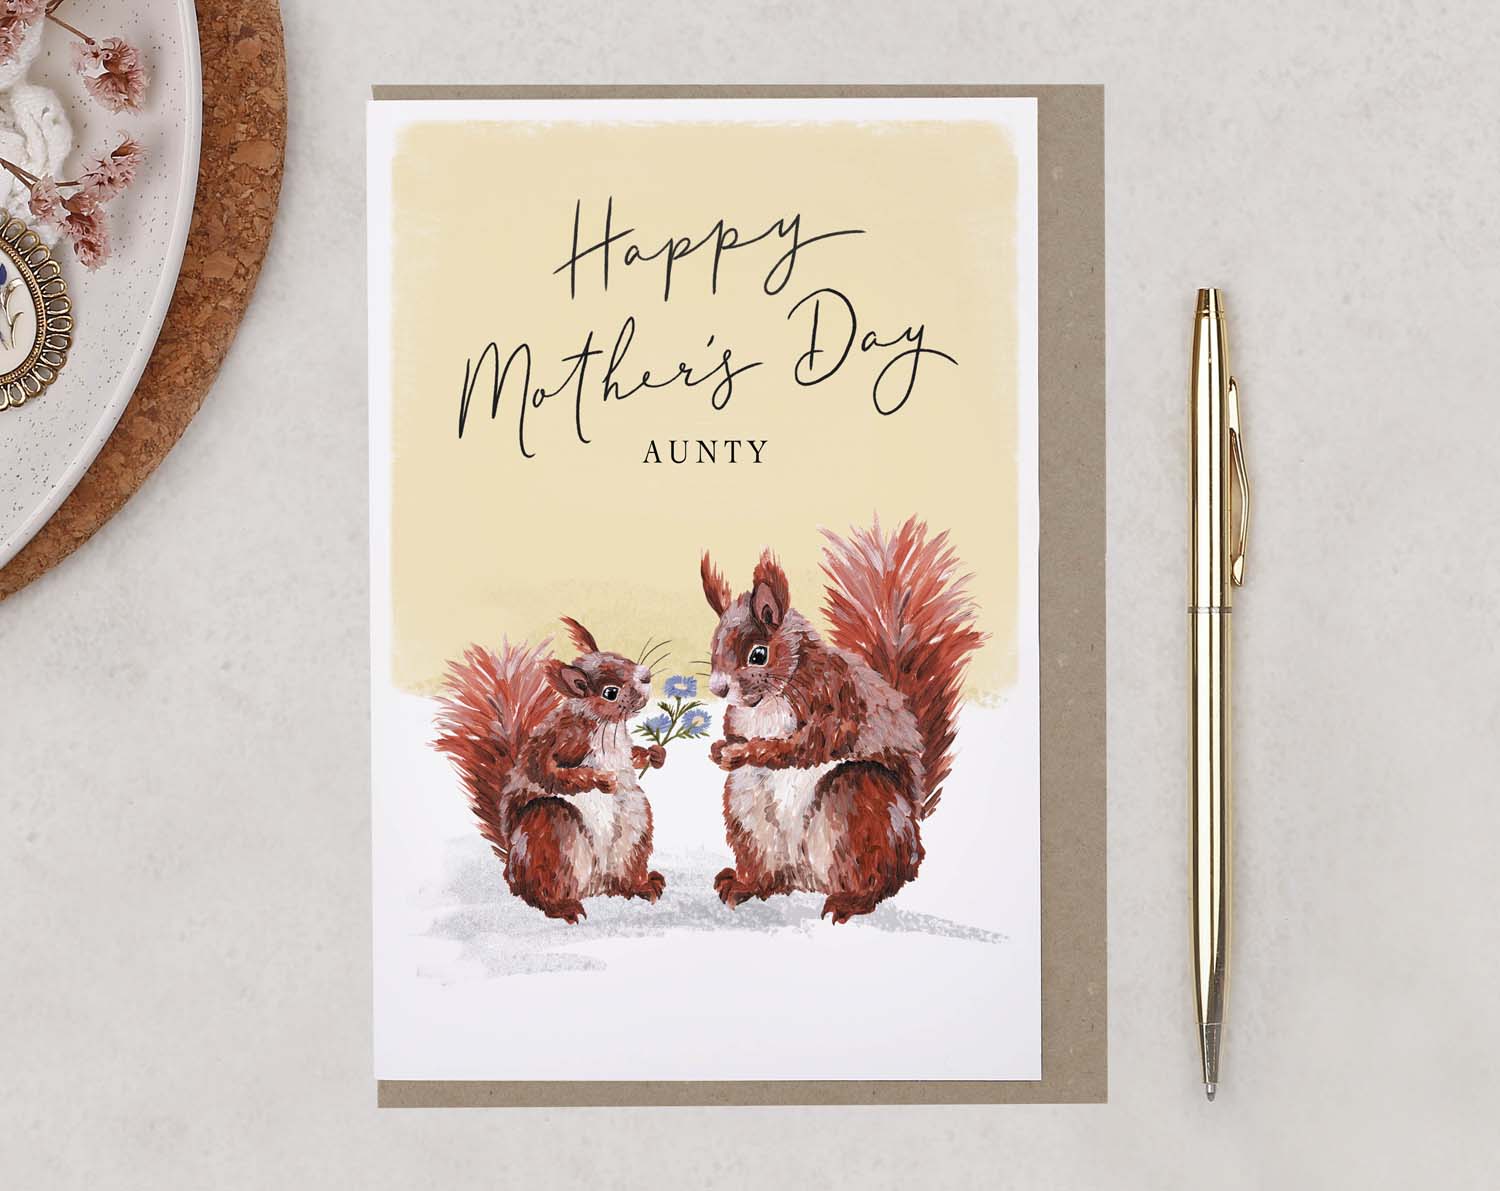 Aunty Happy Mother's Day Squirrel Card